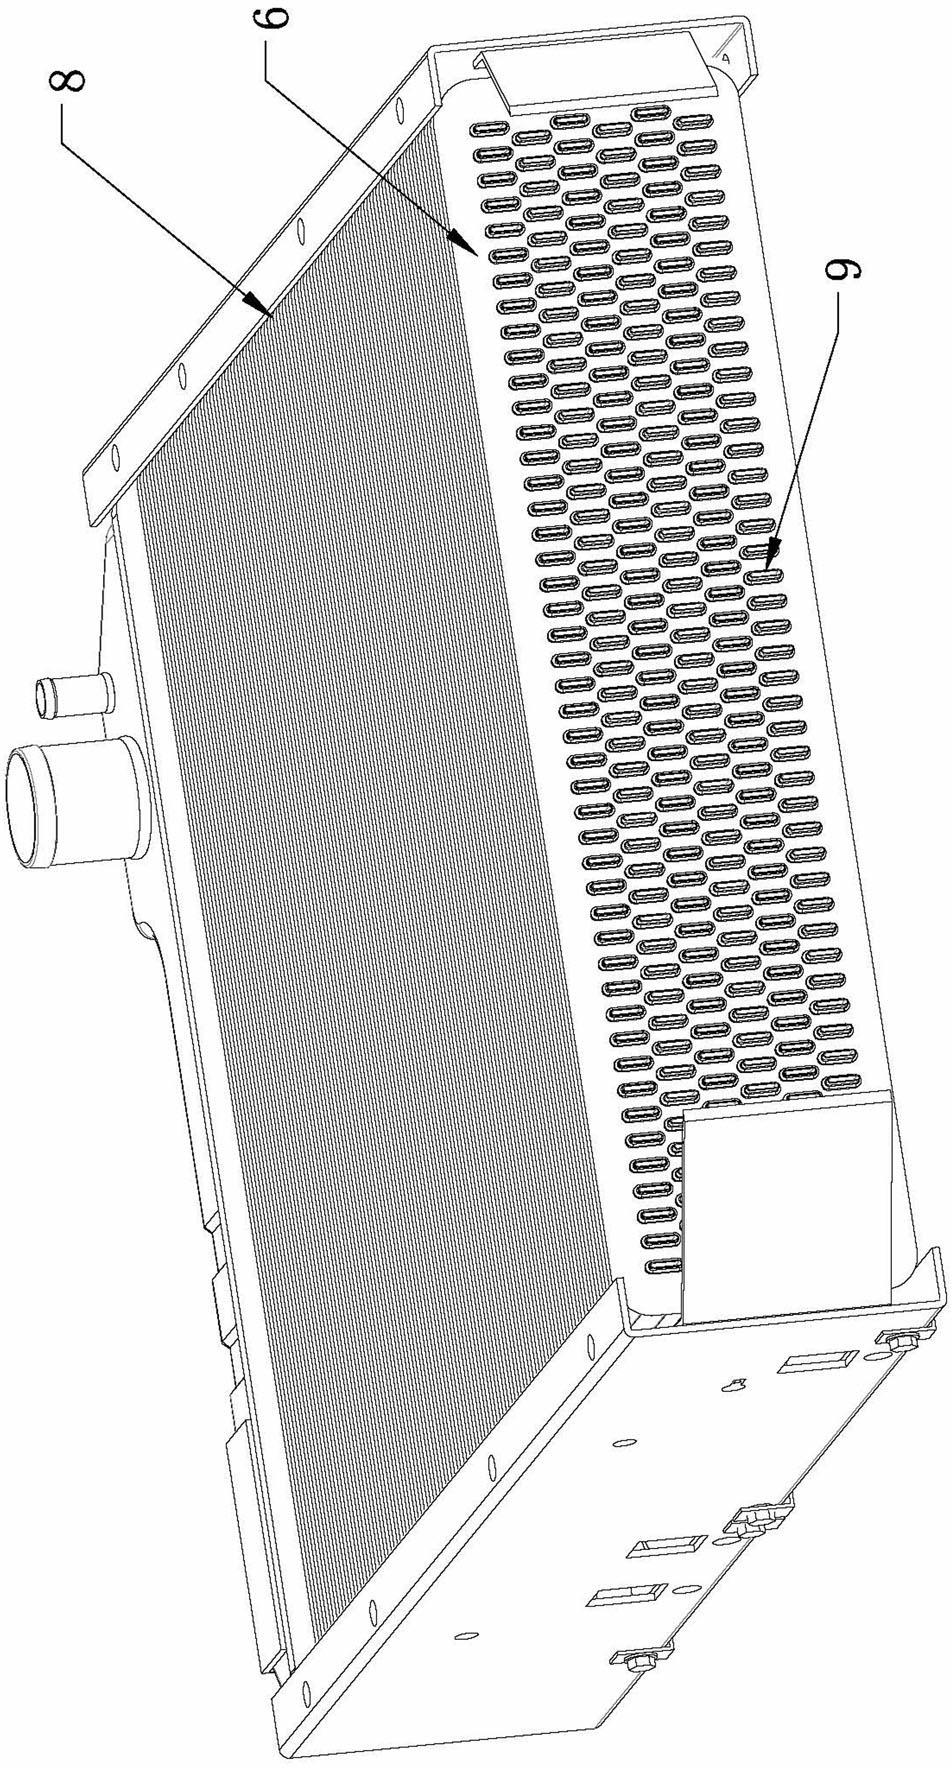 Aluminum finned water tank of water-cooled engine